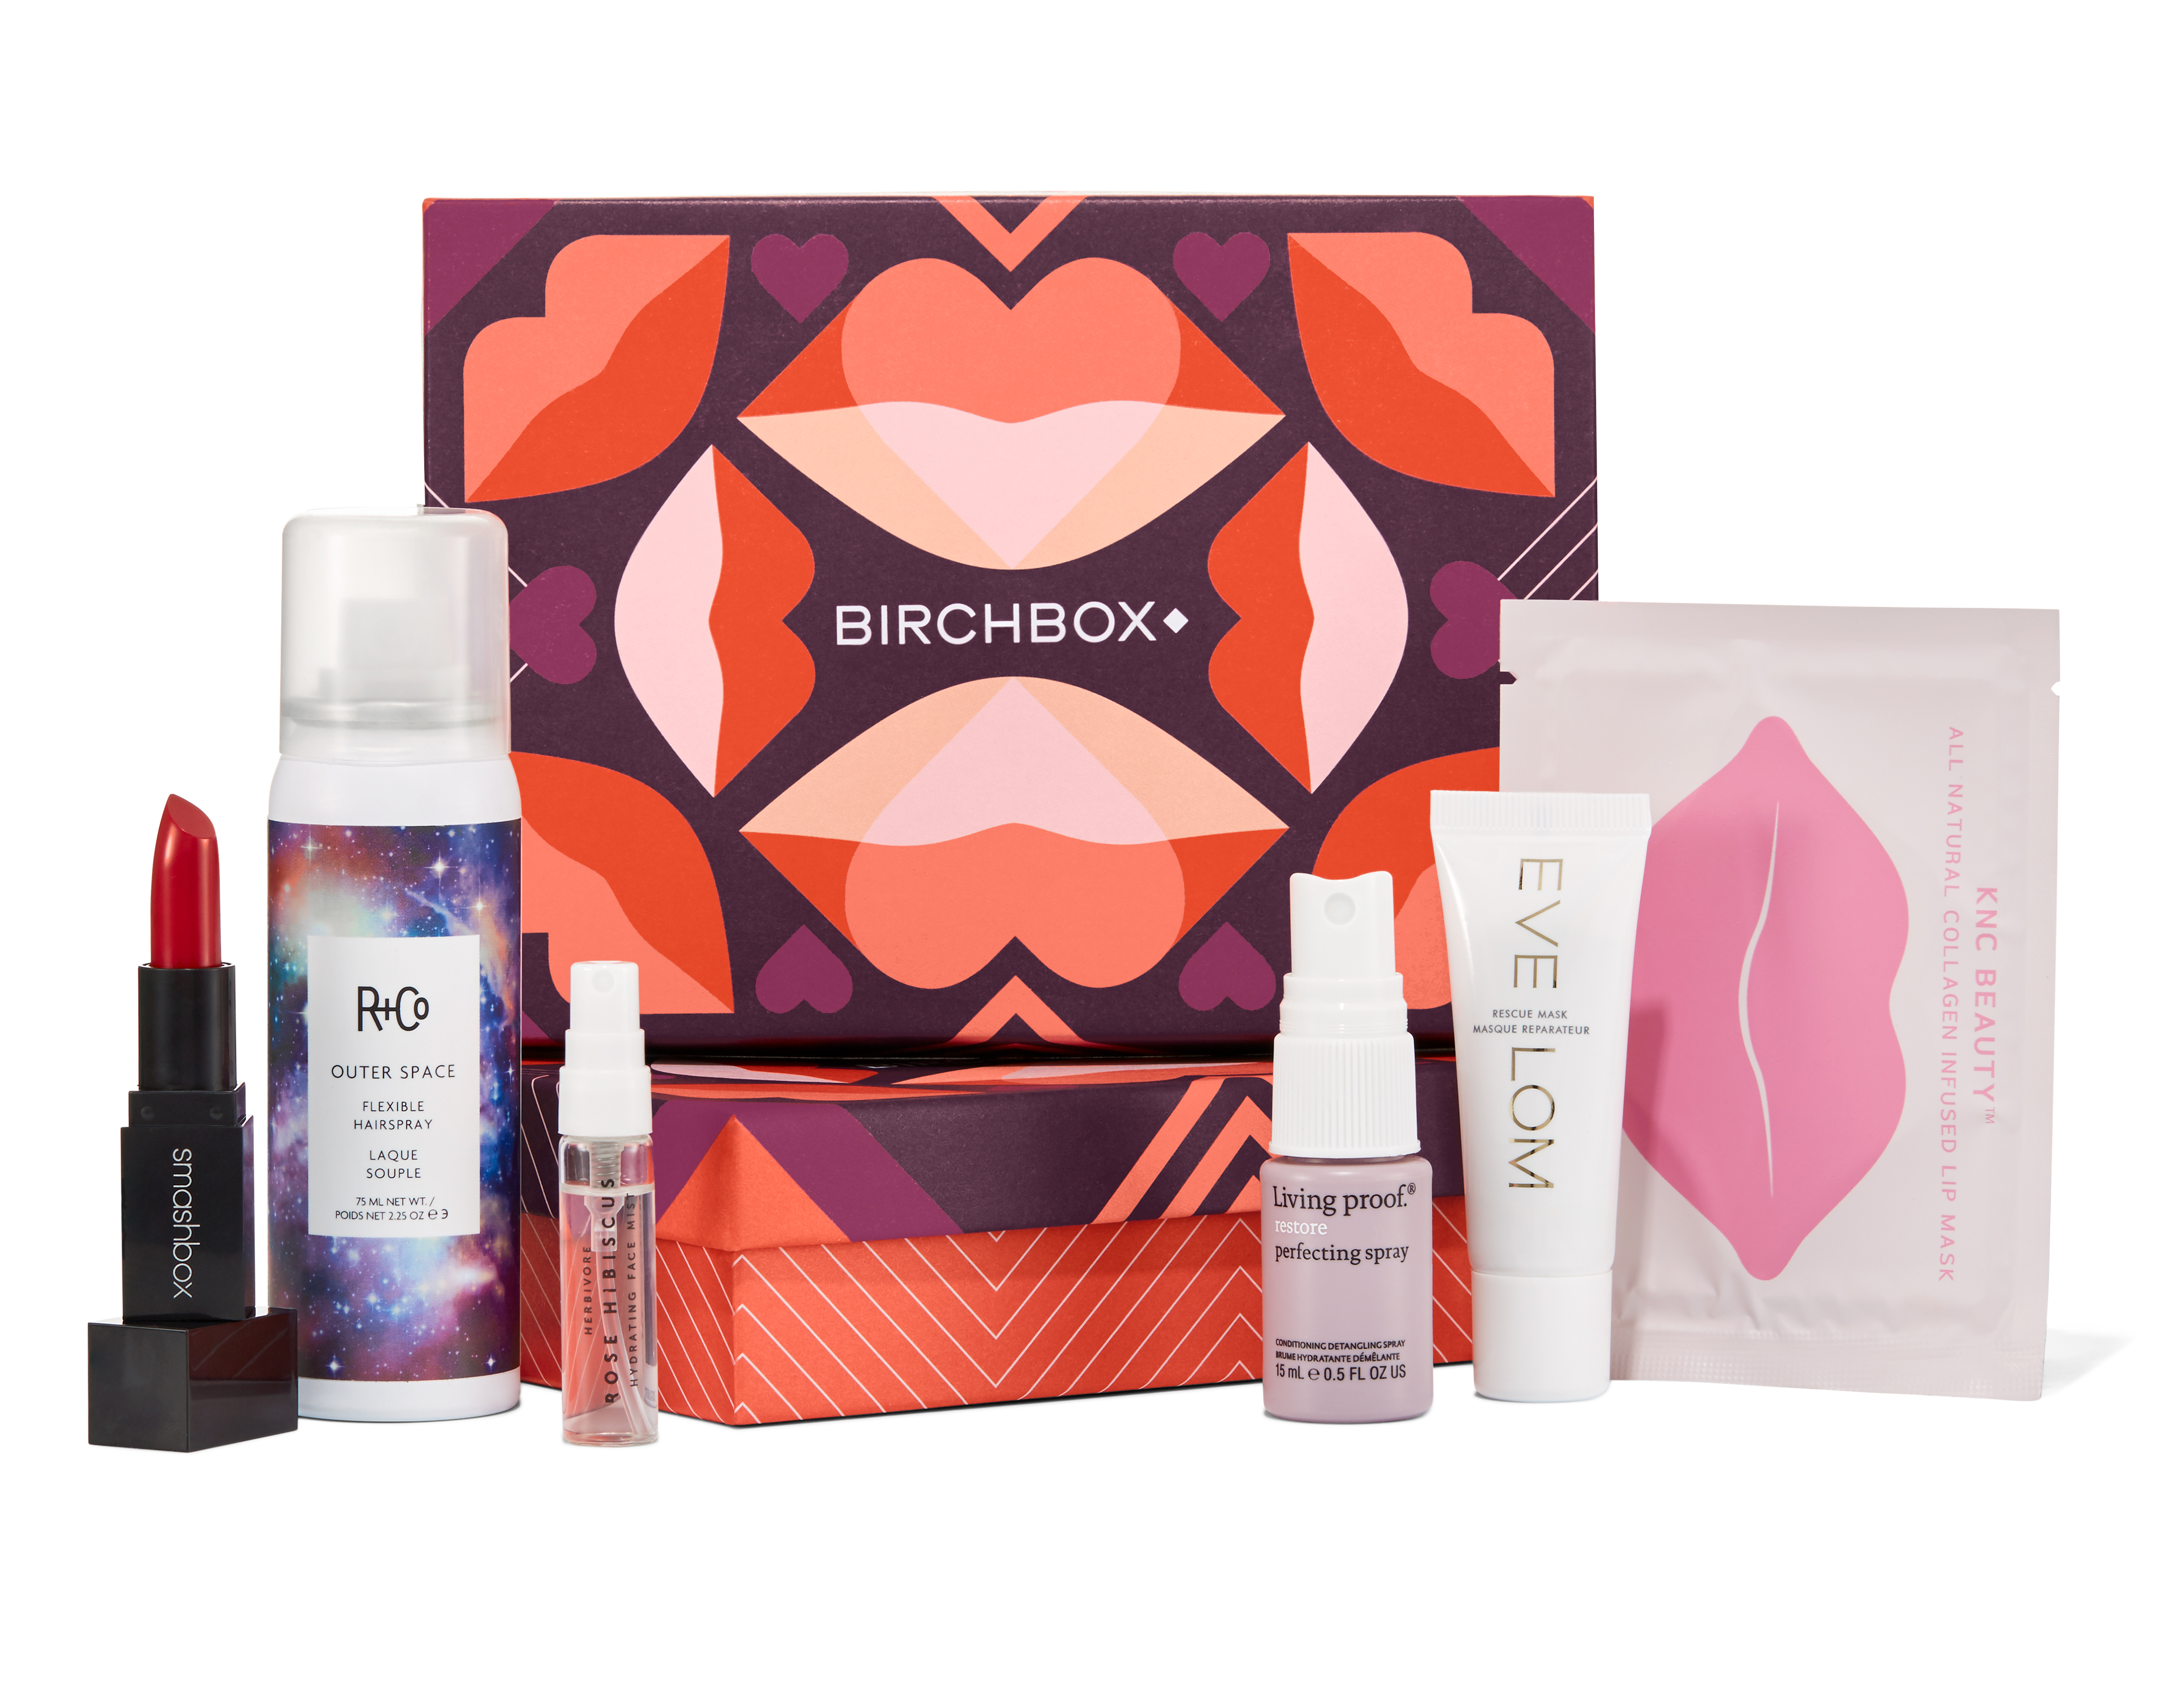 Birchbox to launch a second, more personalized beauty subscription service | TechCrunch